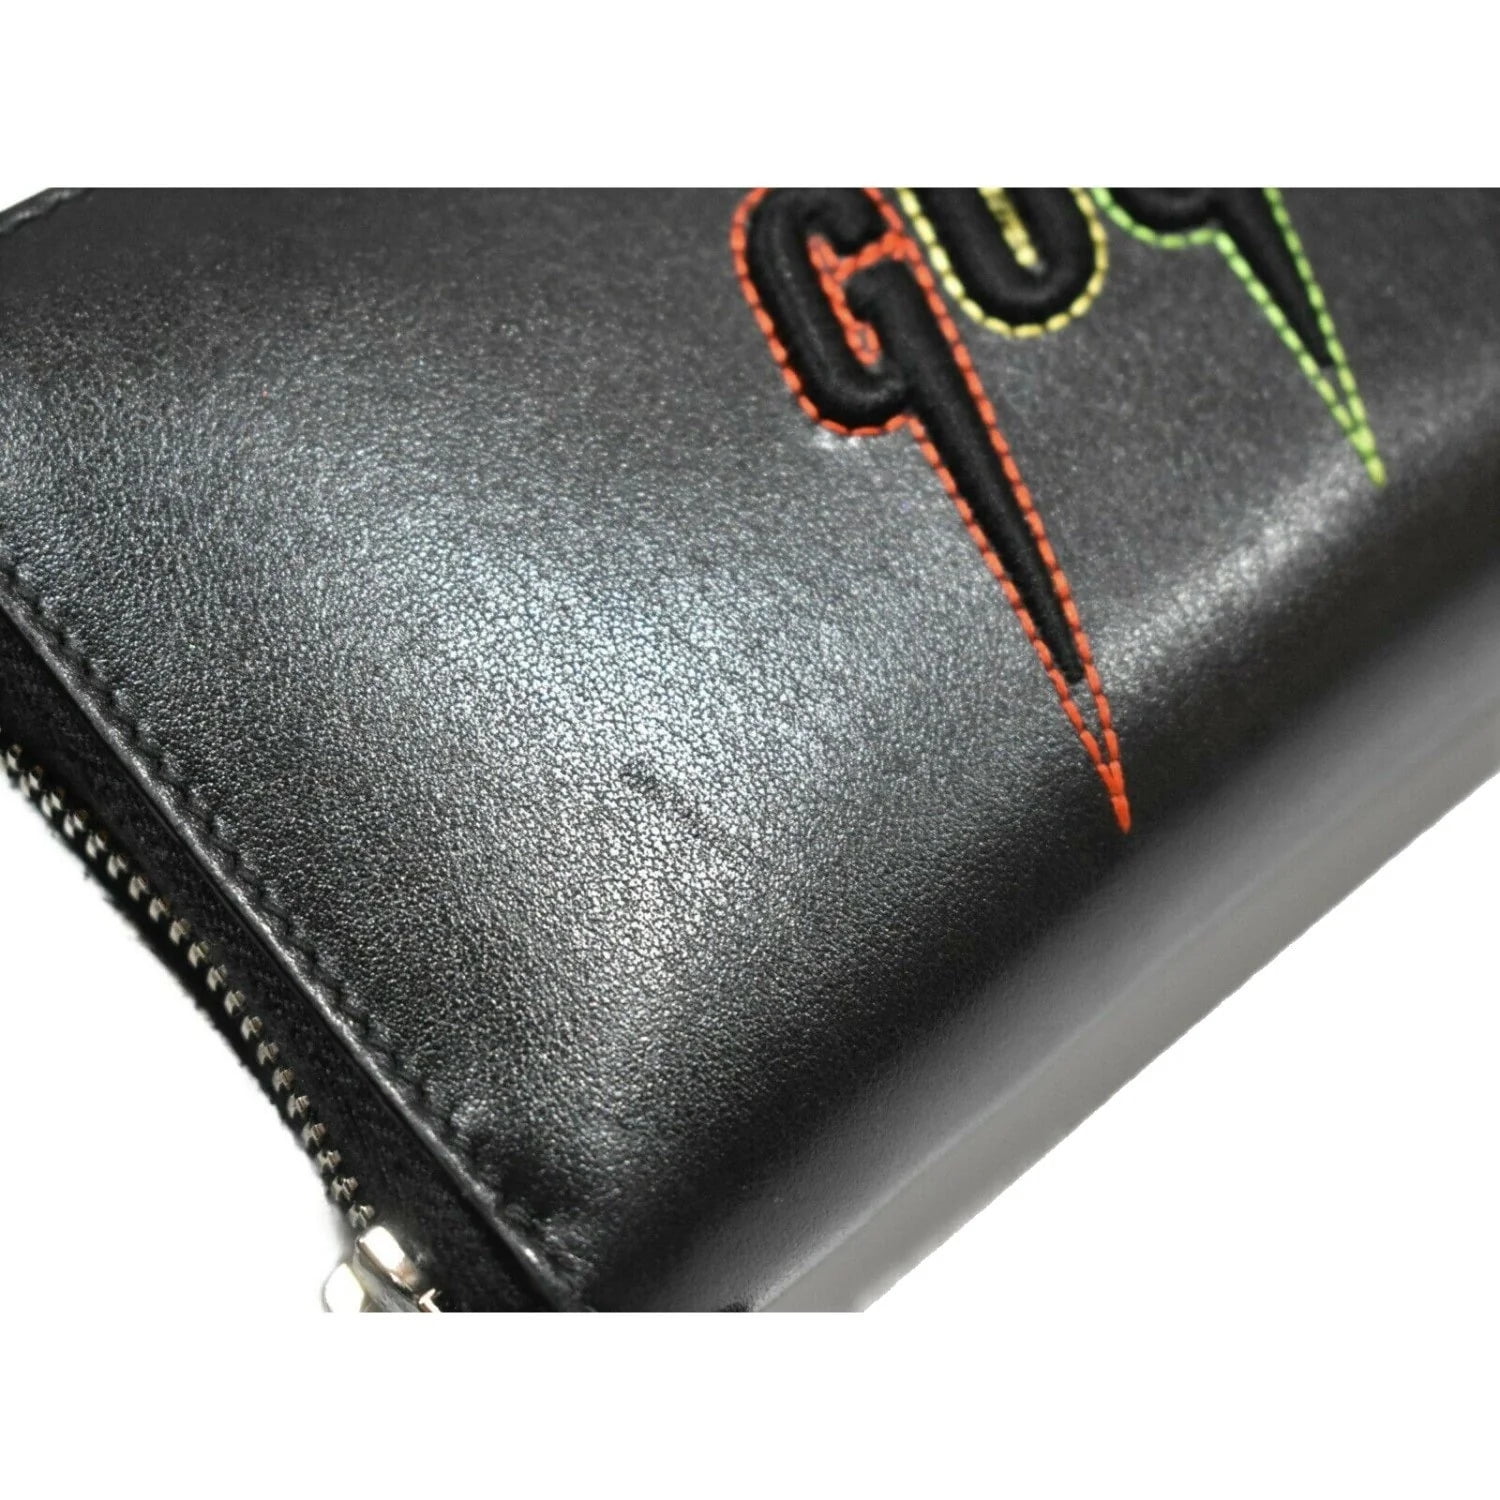 Knife Embroidered Clutch Bag